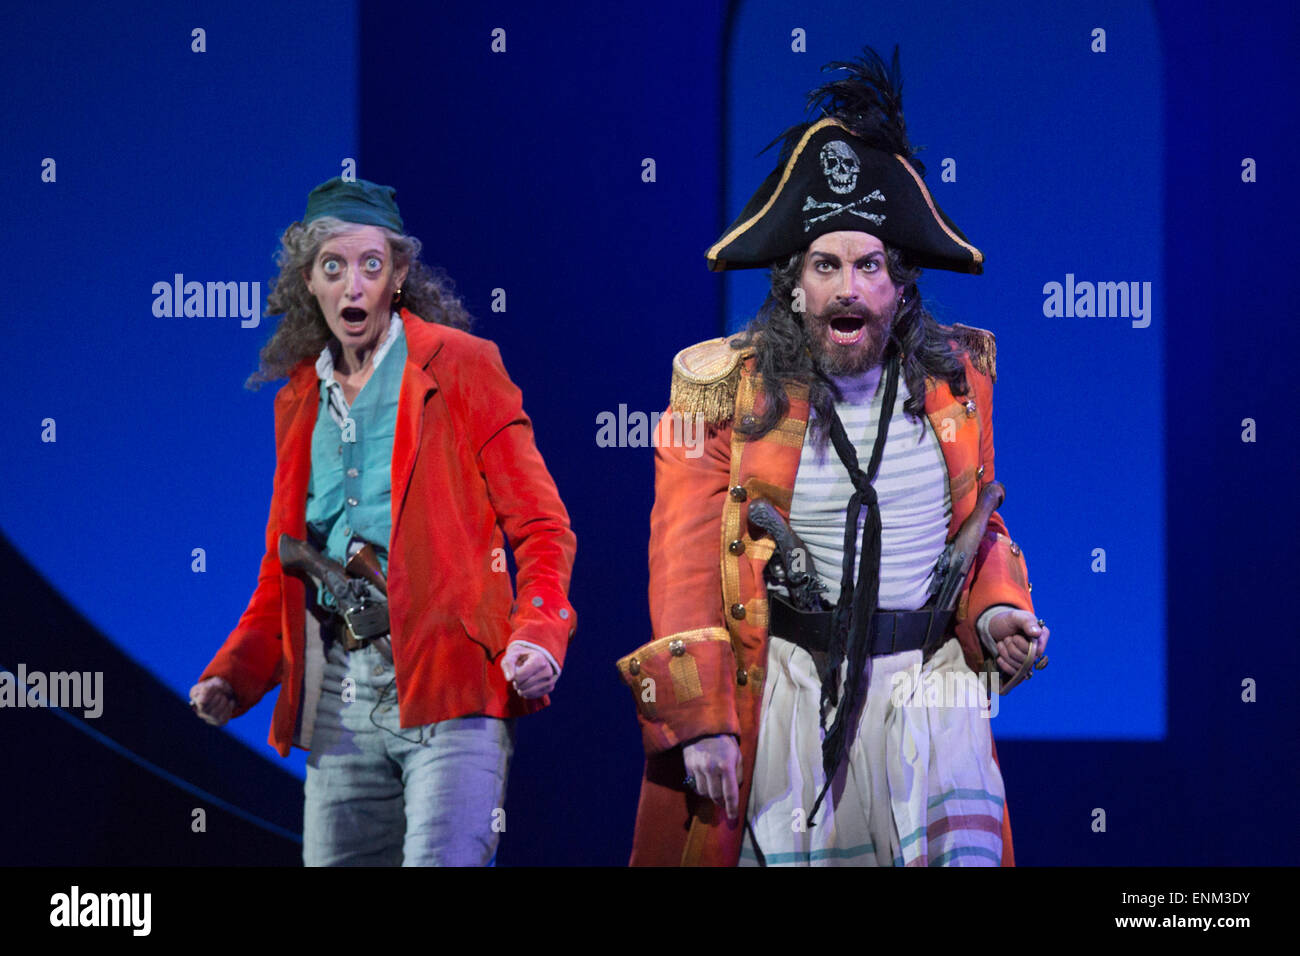 London, UK. 7 May 2015. Rebecca de Pont Davies and Joshua Bloom. Dress rehearsal of the Gilbert and Sullivan comic opera 'The Pirates of Penzance' at the London Coliseum. Award winning director Mike Leigh makes his operatic directing debut with The Pirates of Penzance. The ENO production opens at the London Coliseum on 9 May 2015 and runs for 14 productions until 27 June 2015. The English National Opera production is conducted by David Parry. Cast: Andrew Shore as Major-General Stanley, Joshua Bloom as The Pirate King, Alexander Robin Baker as Samuel, Robert Murray as Frederic, the Pirate Appr Stock Photo